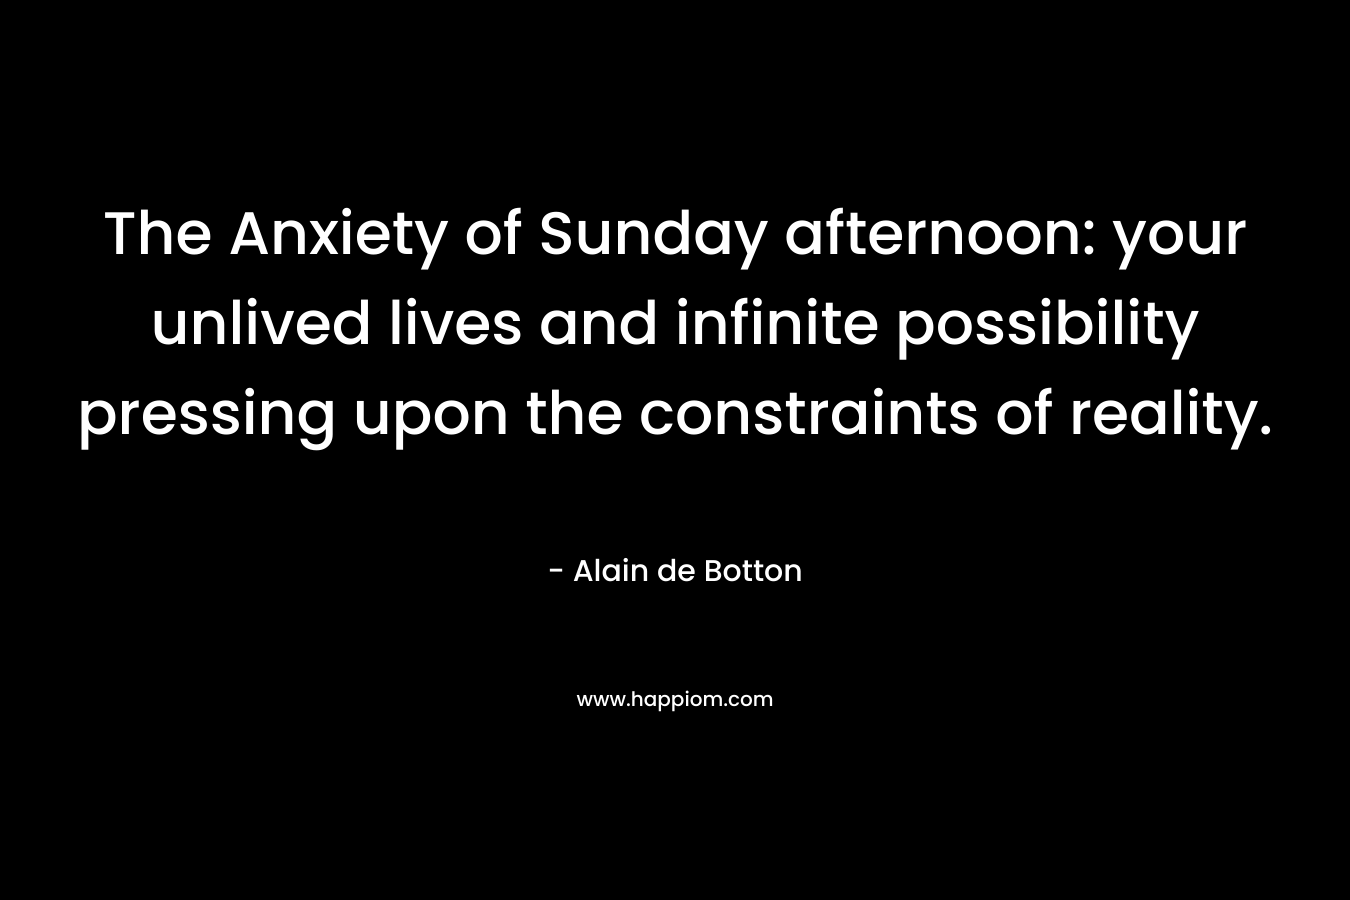 The Anxiety of Sunday afternoon: your unlived lives and infinite possibility pressing upon the constraints of reality.